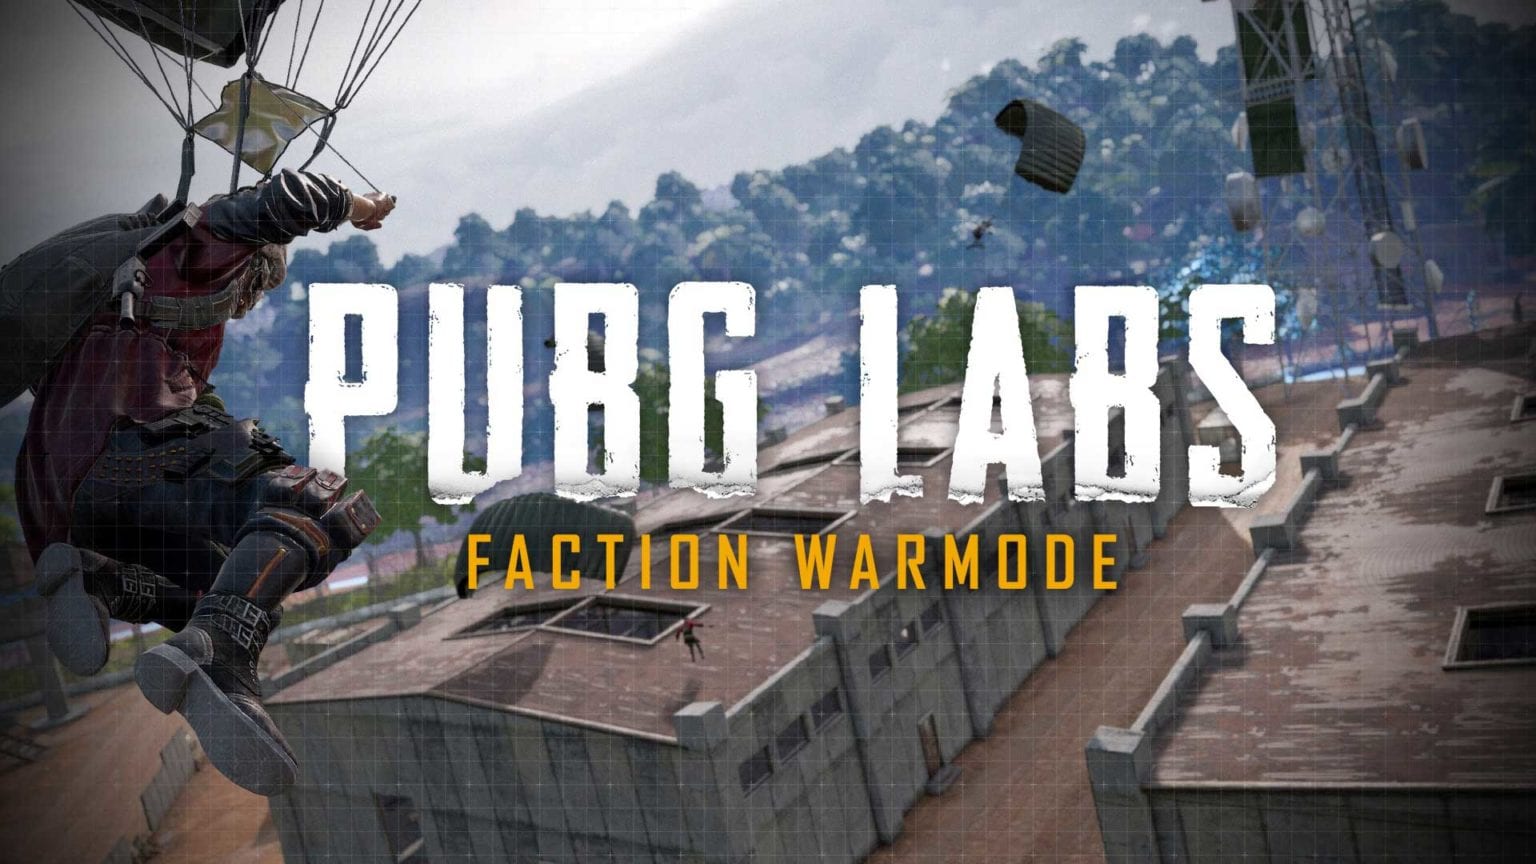 PUBG is Back Now with PUBG Faction Warmode